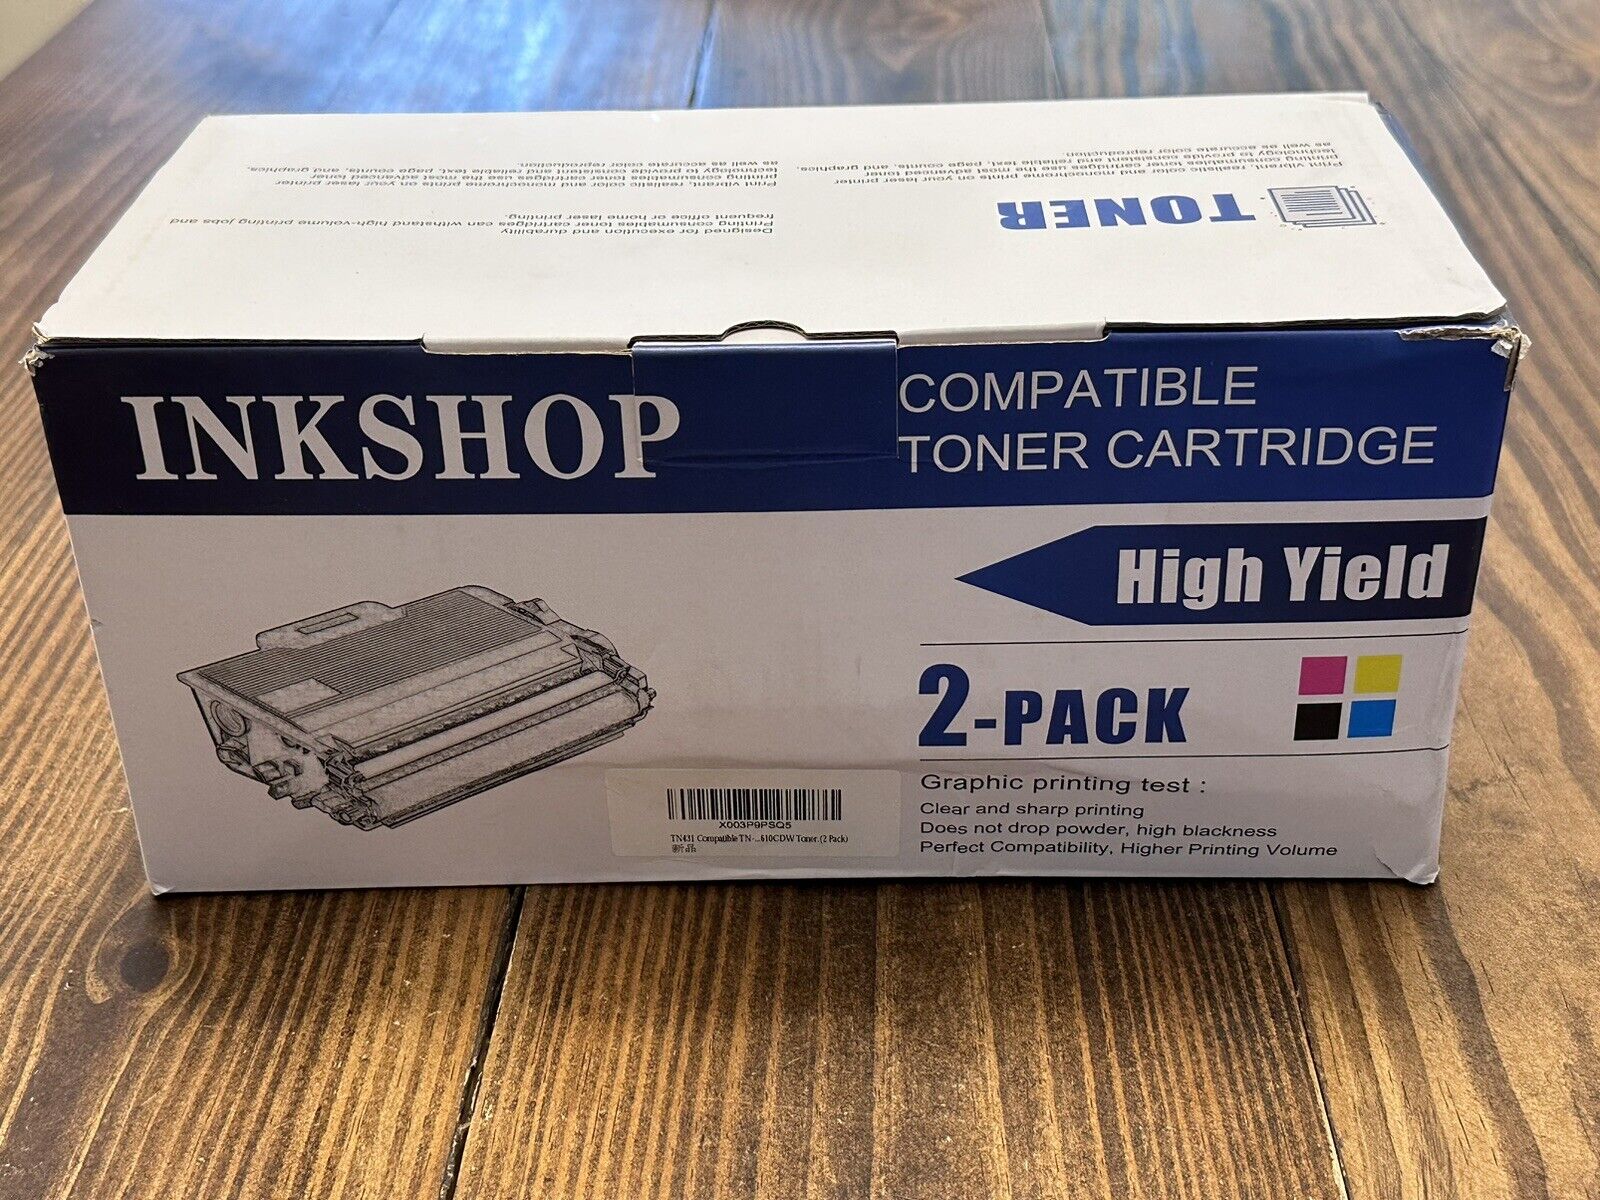 Ink Shop TN-431 Black High Yield Toner Cartridge 2 Pack For Brother